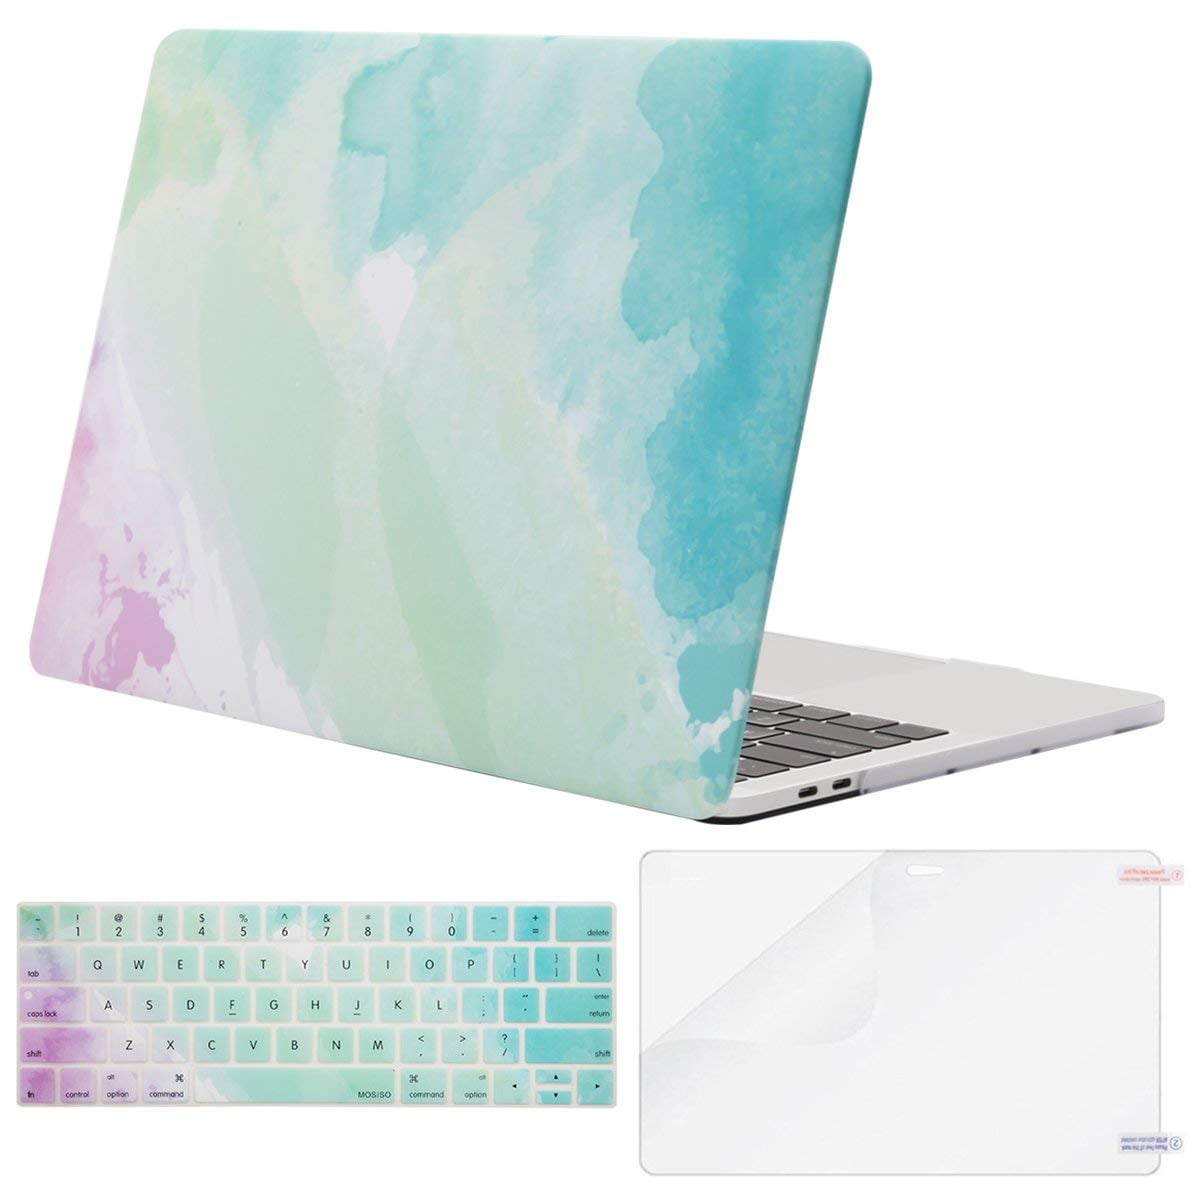 Mac Computer Case Surprise Colorful Party Balloons Plastic Hard Shell Compatible Mac Air 11 Pro 13 15 MacBook Covers Protection for MacBook 2016-2019 Version